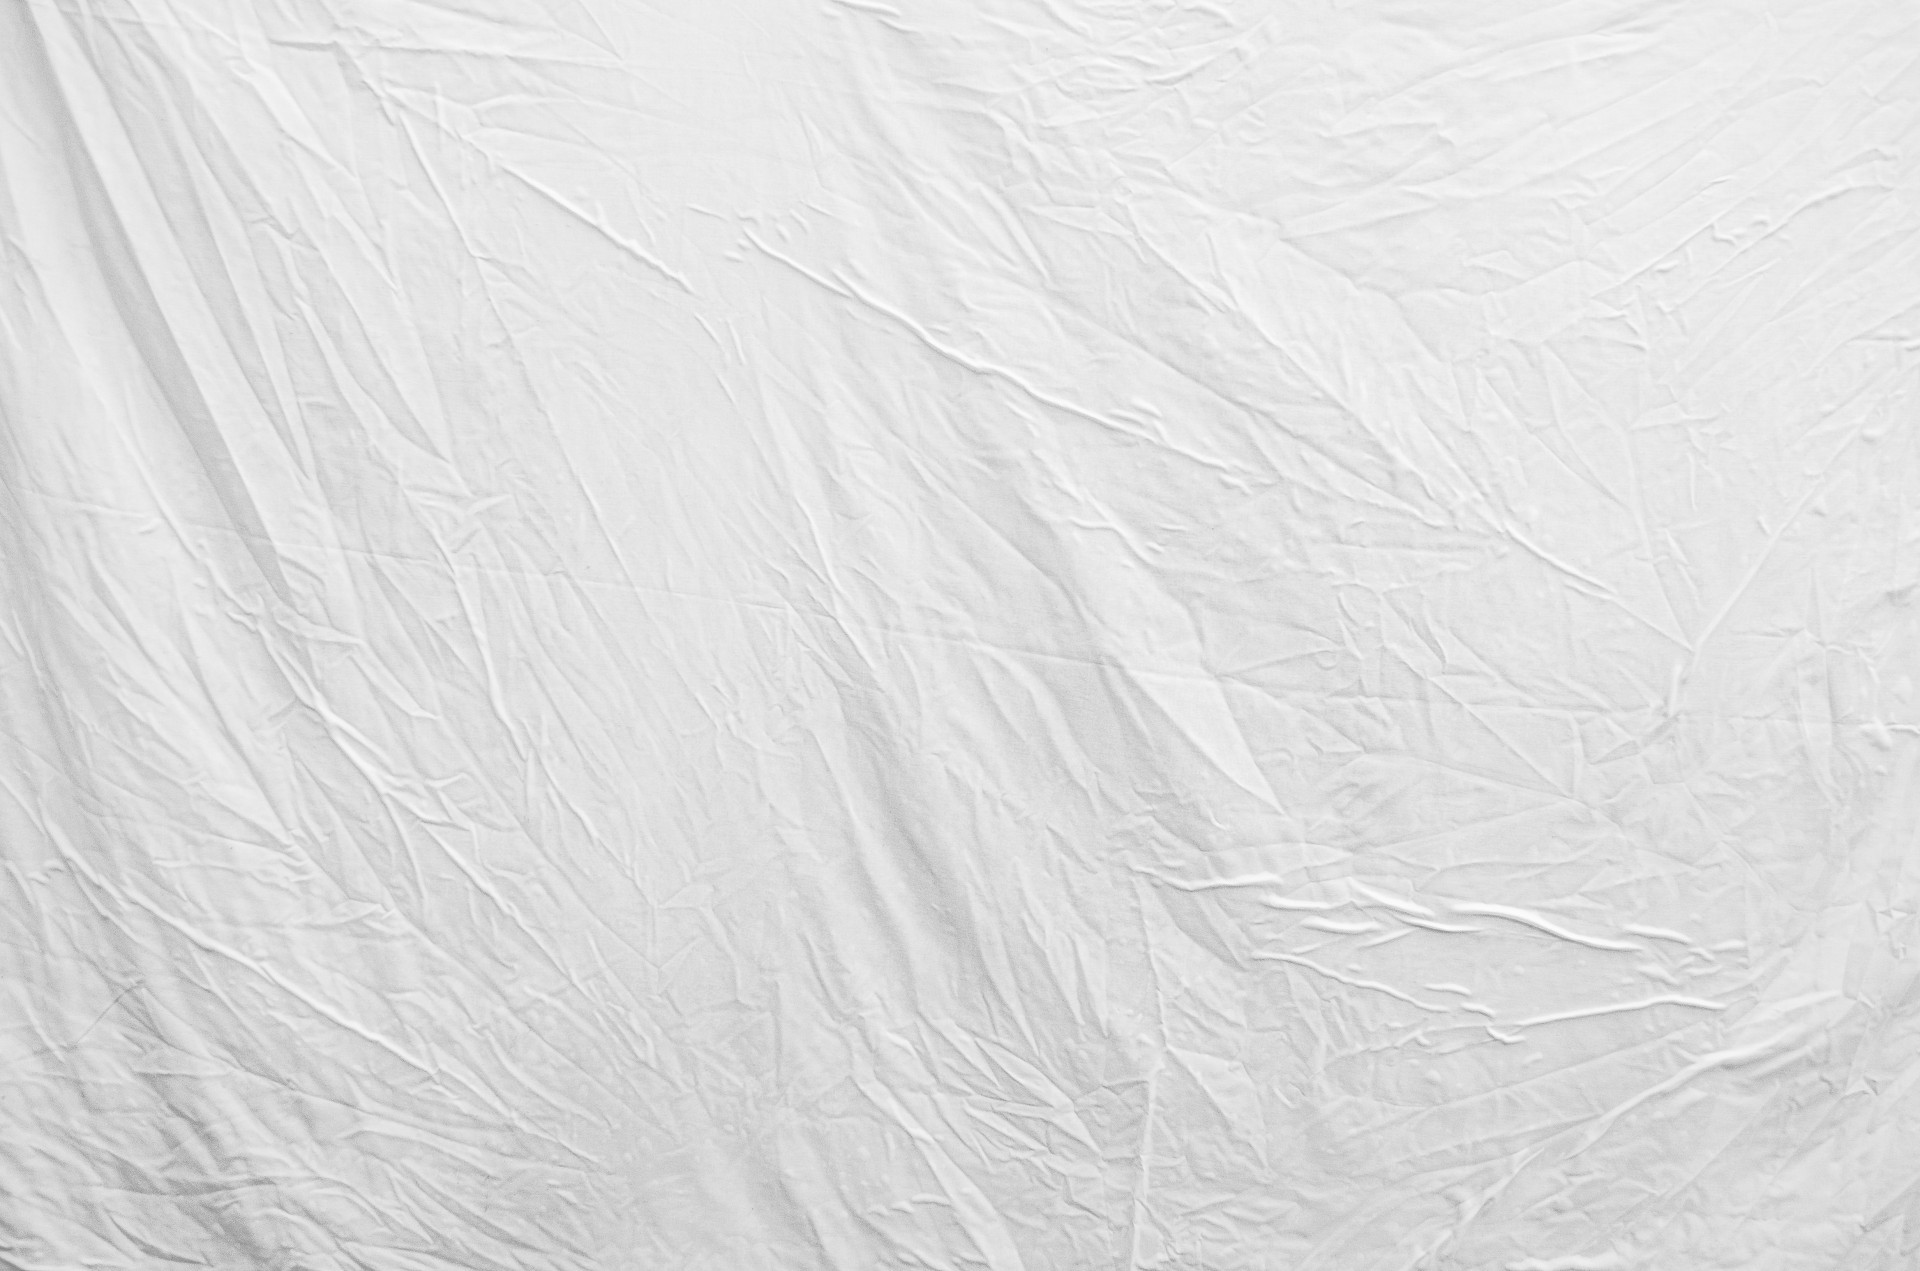  White background HD    Download free full HD  backgrounds  